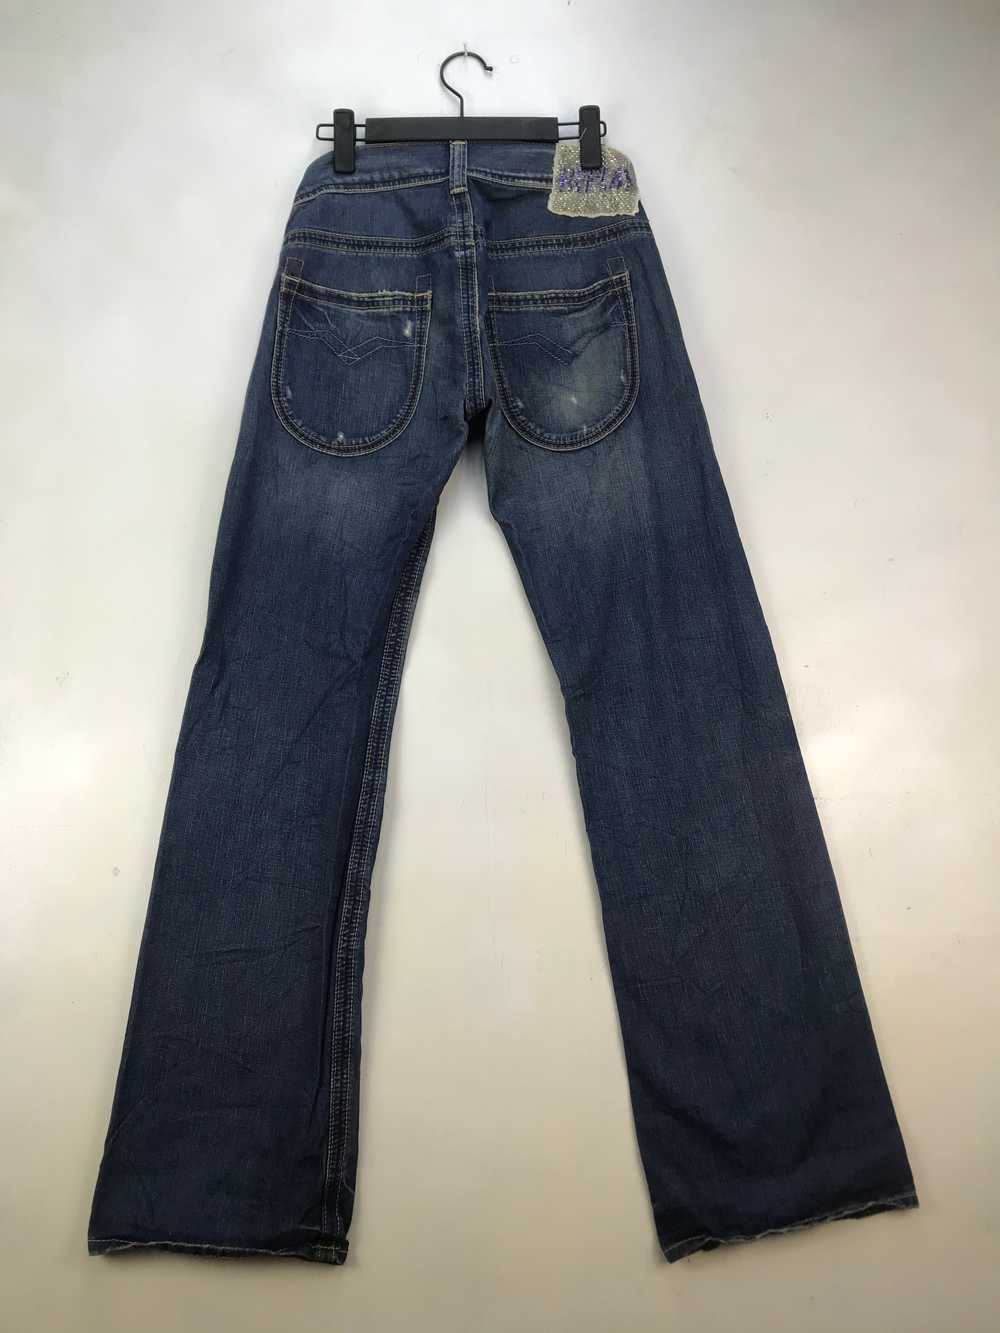 Replay - REPLAY DENIM BOOTCUT STYLE JEANS - image 3